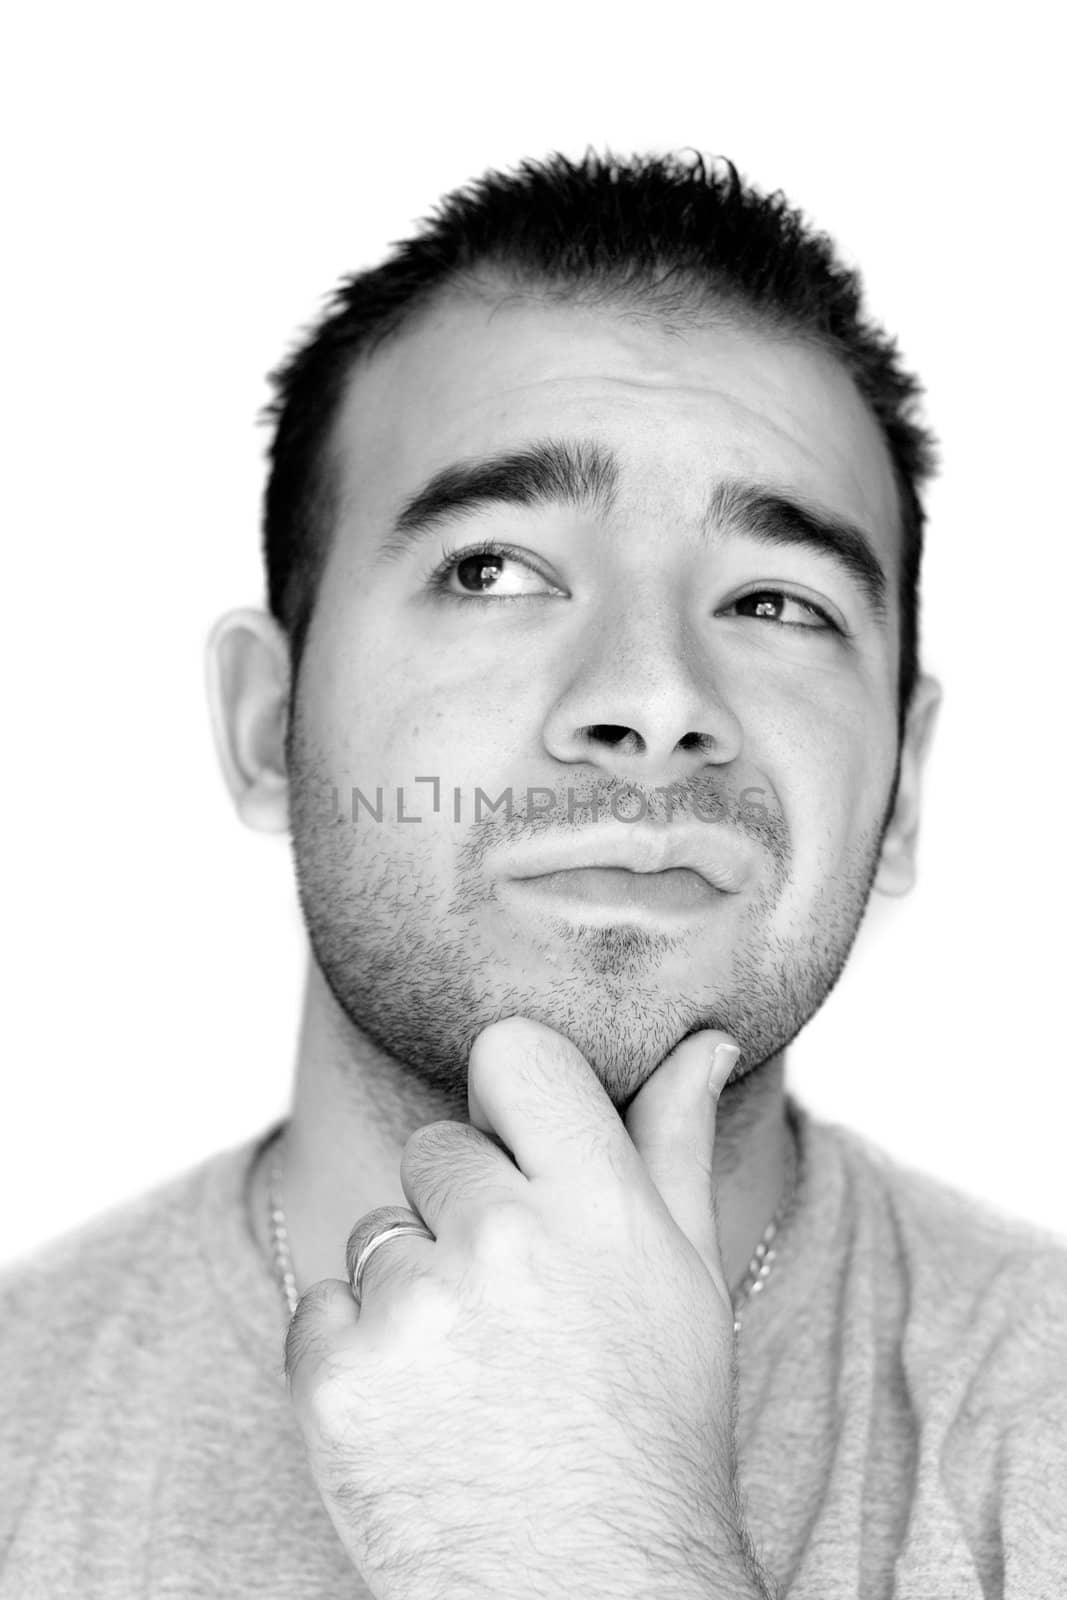 A young man with his hand on his chin thinking an important decision - black and white.